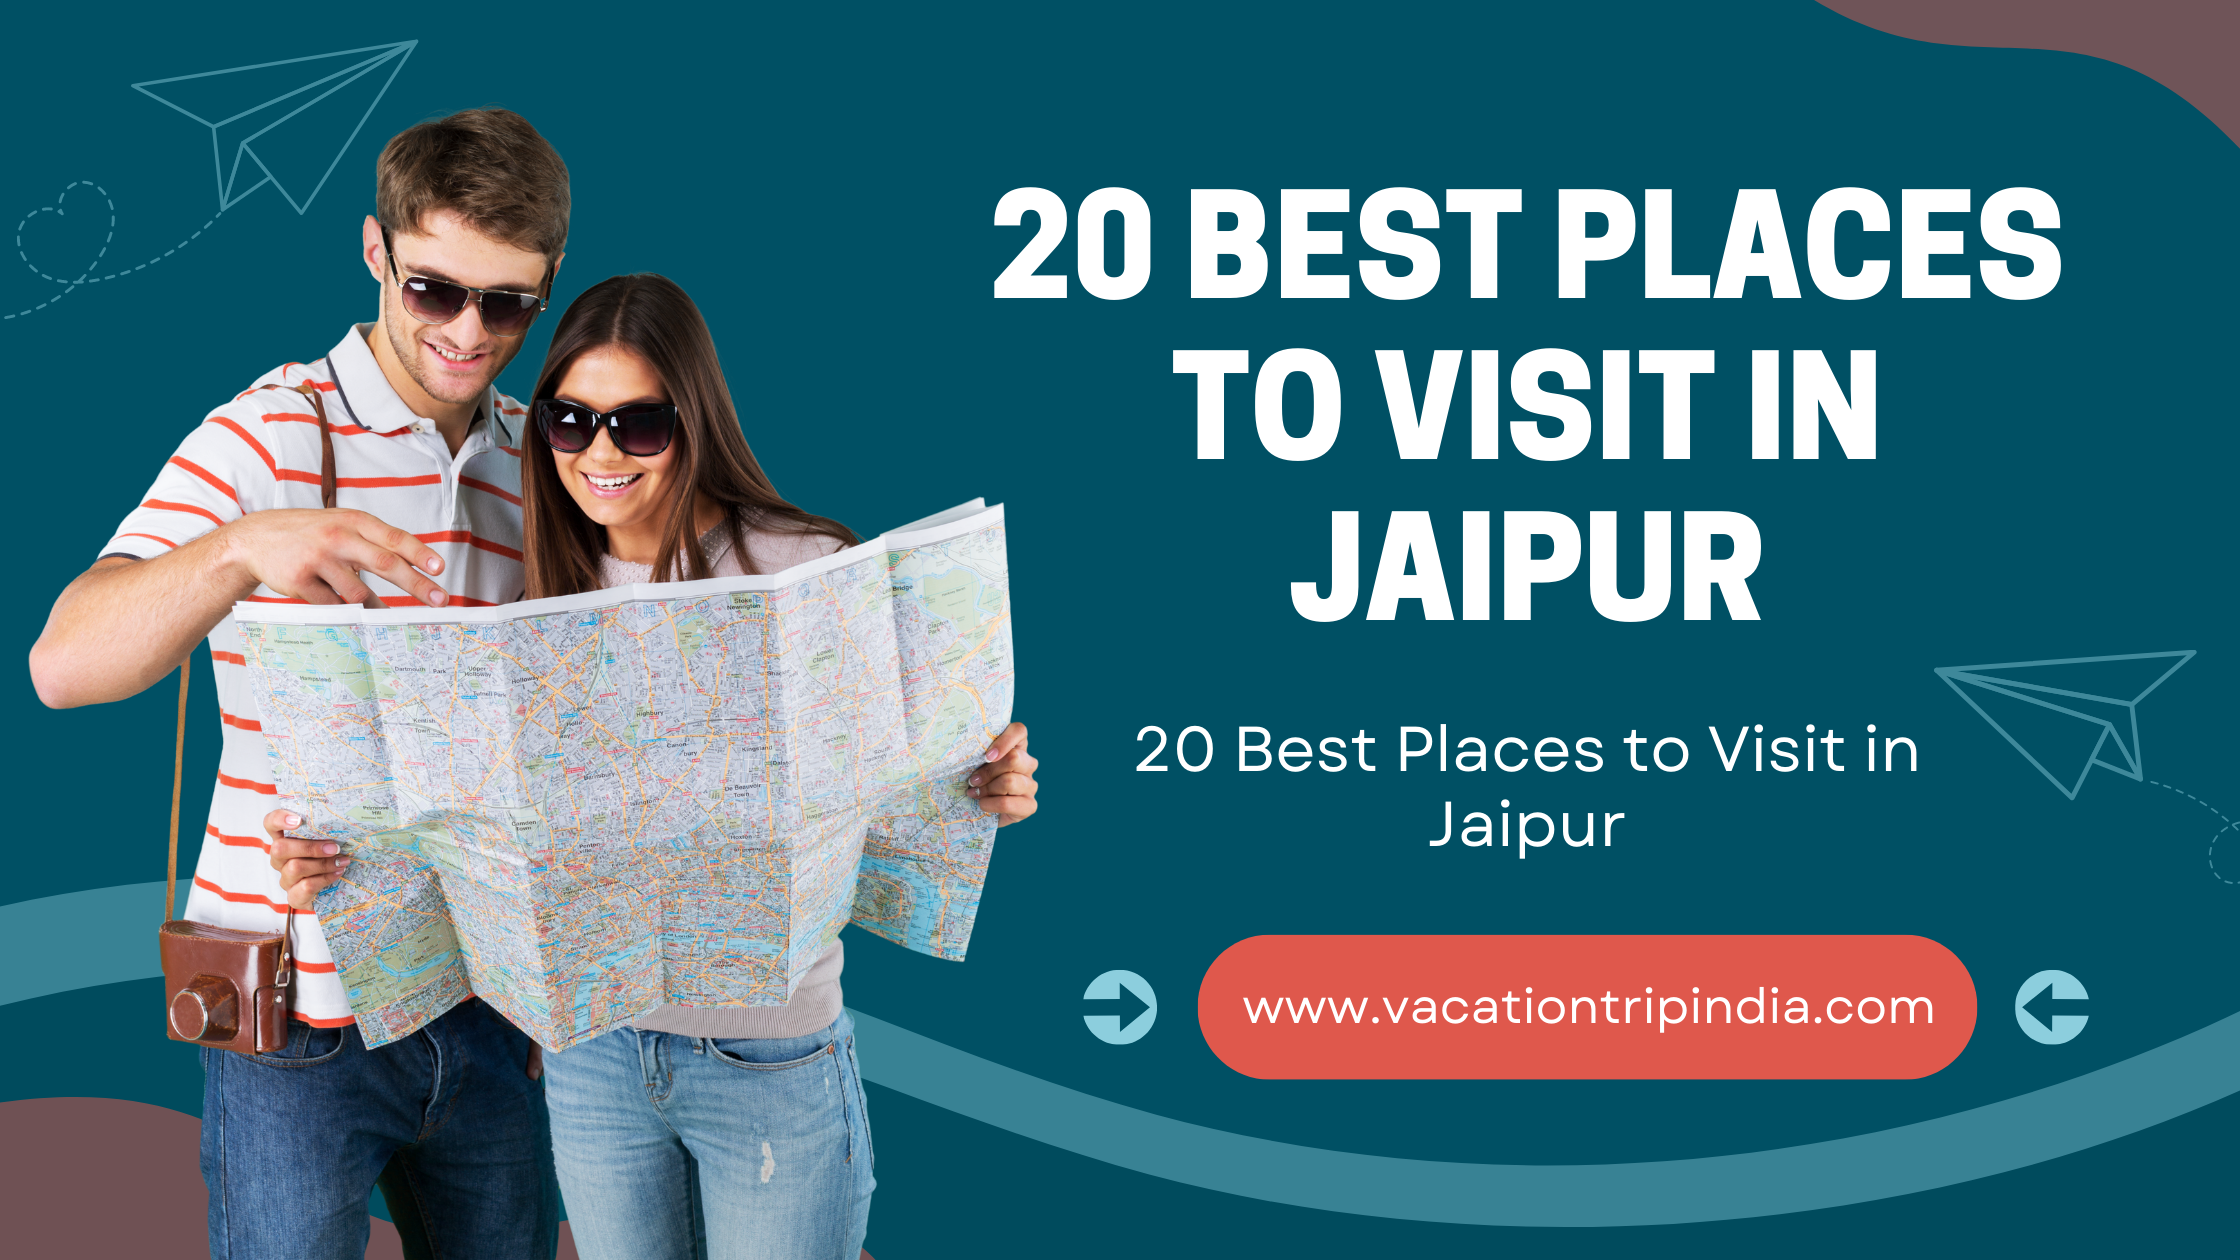 20 Best Places to Visit in Jaipur